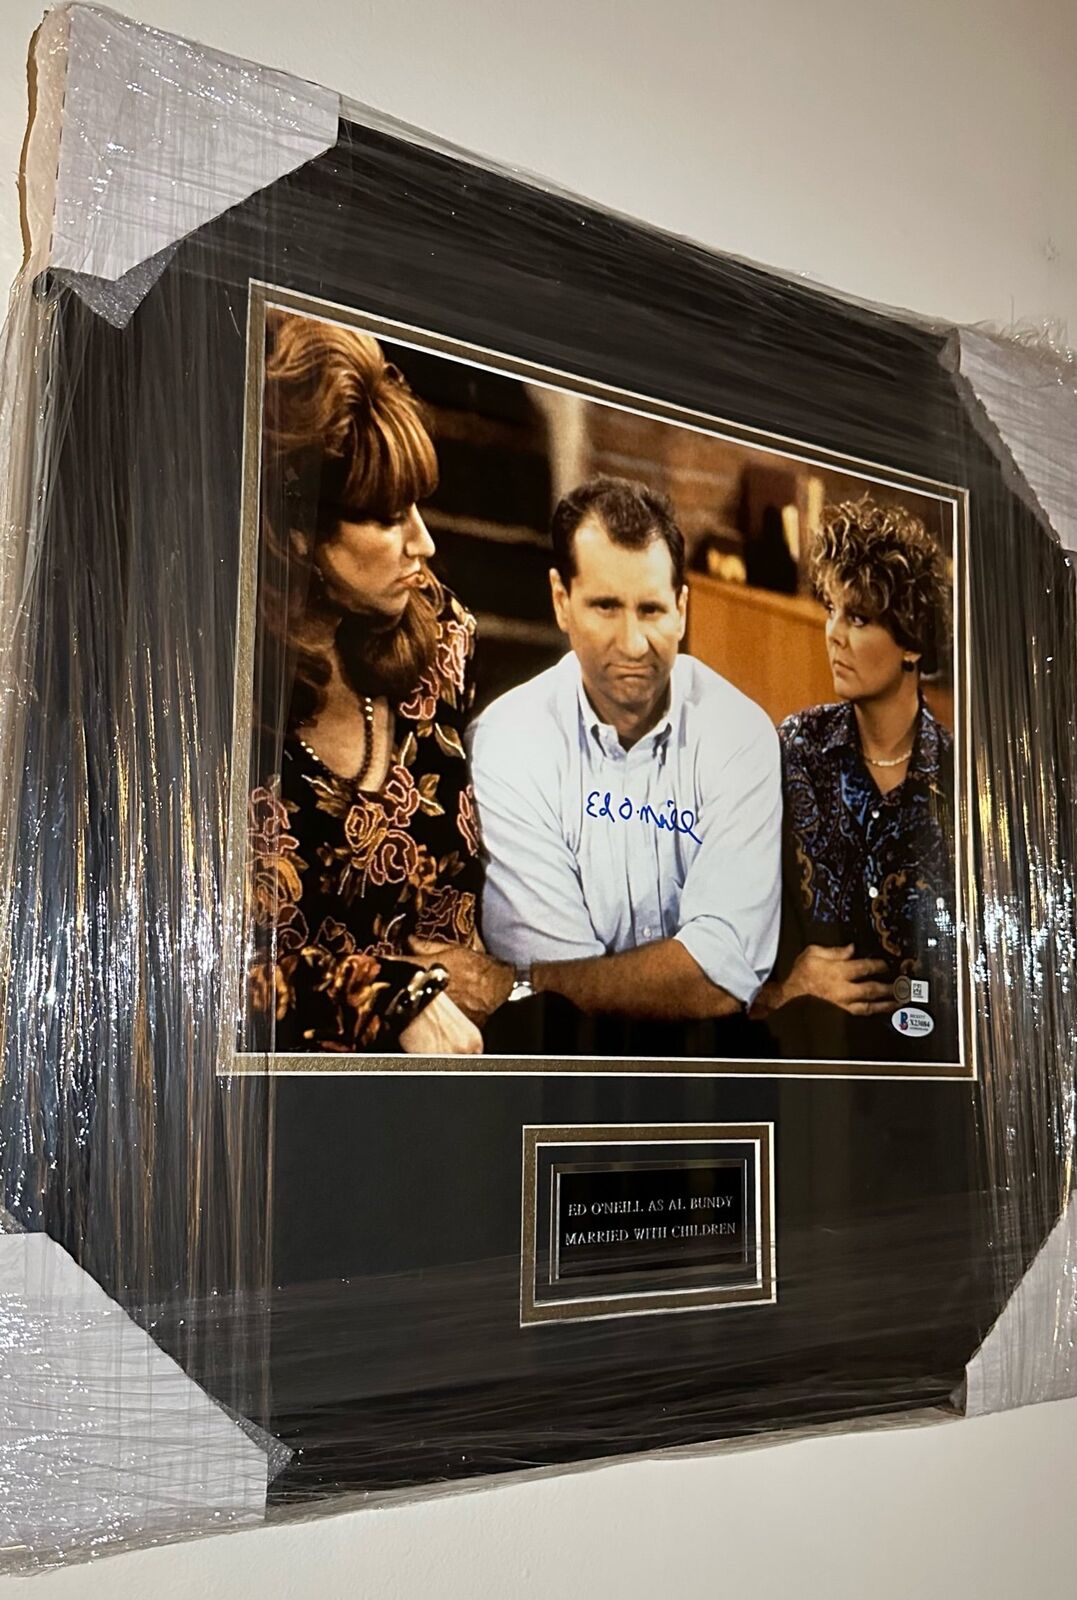 Ed O'neill Al Bundy Autographed Framed Photo Authenticated by Beckett